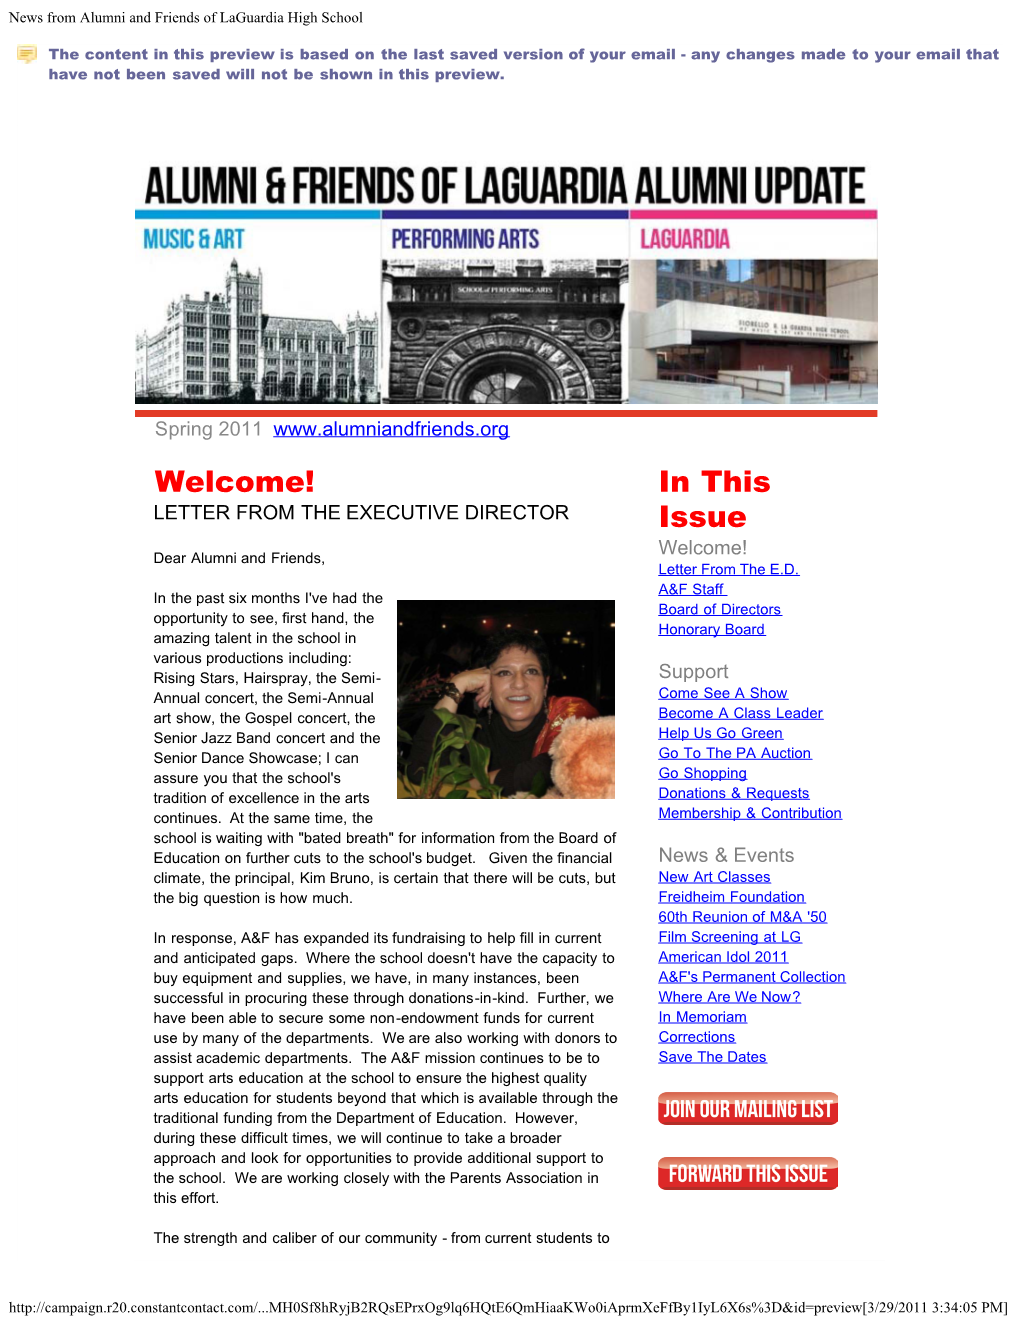 News from Alumni and Friends of Laguardia High School